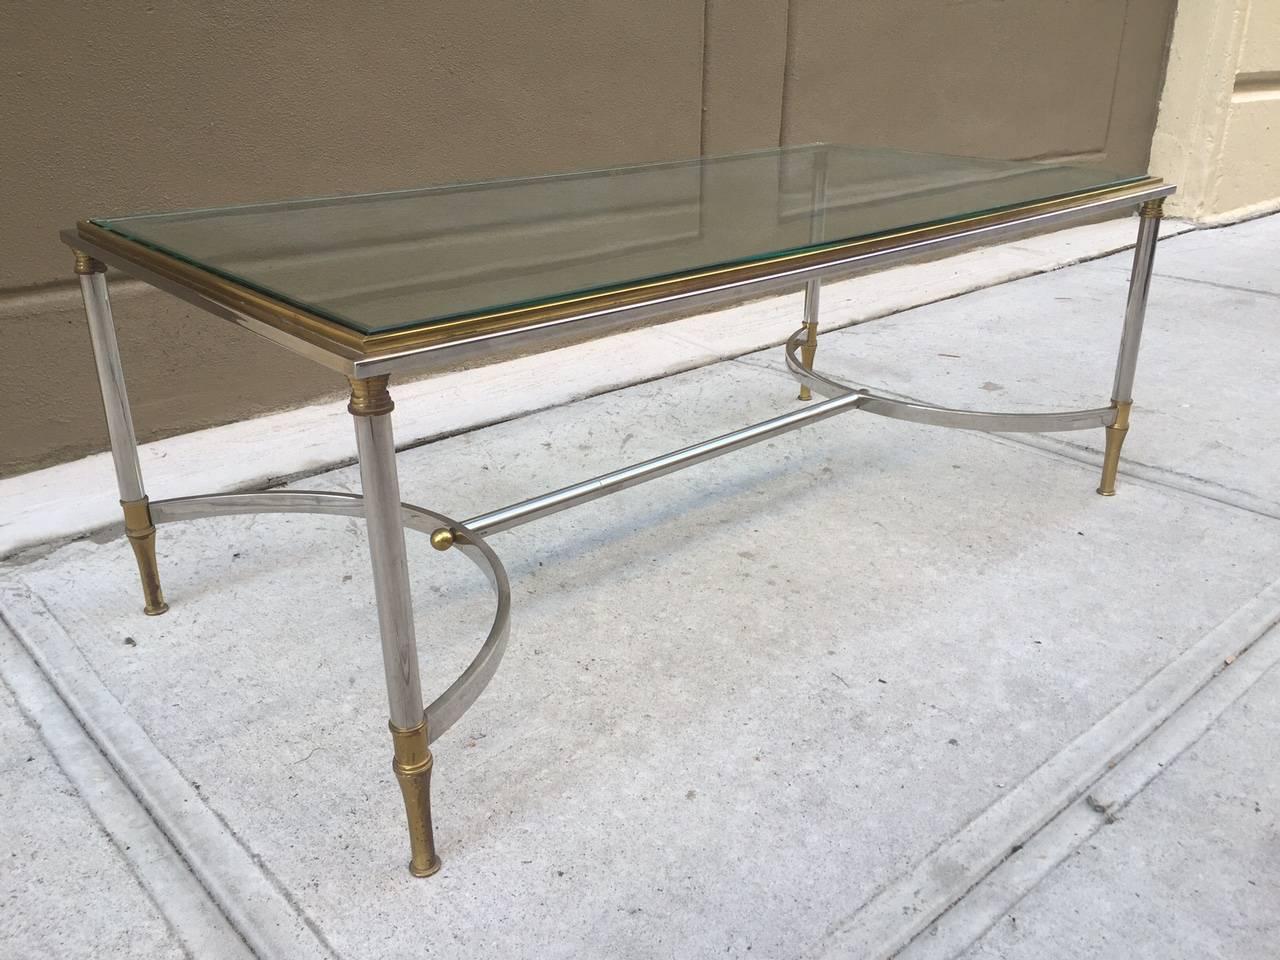 Bronze and Steel Coffee Table style of Maison Jansen. Curved stretcher and glass top.